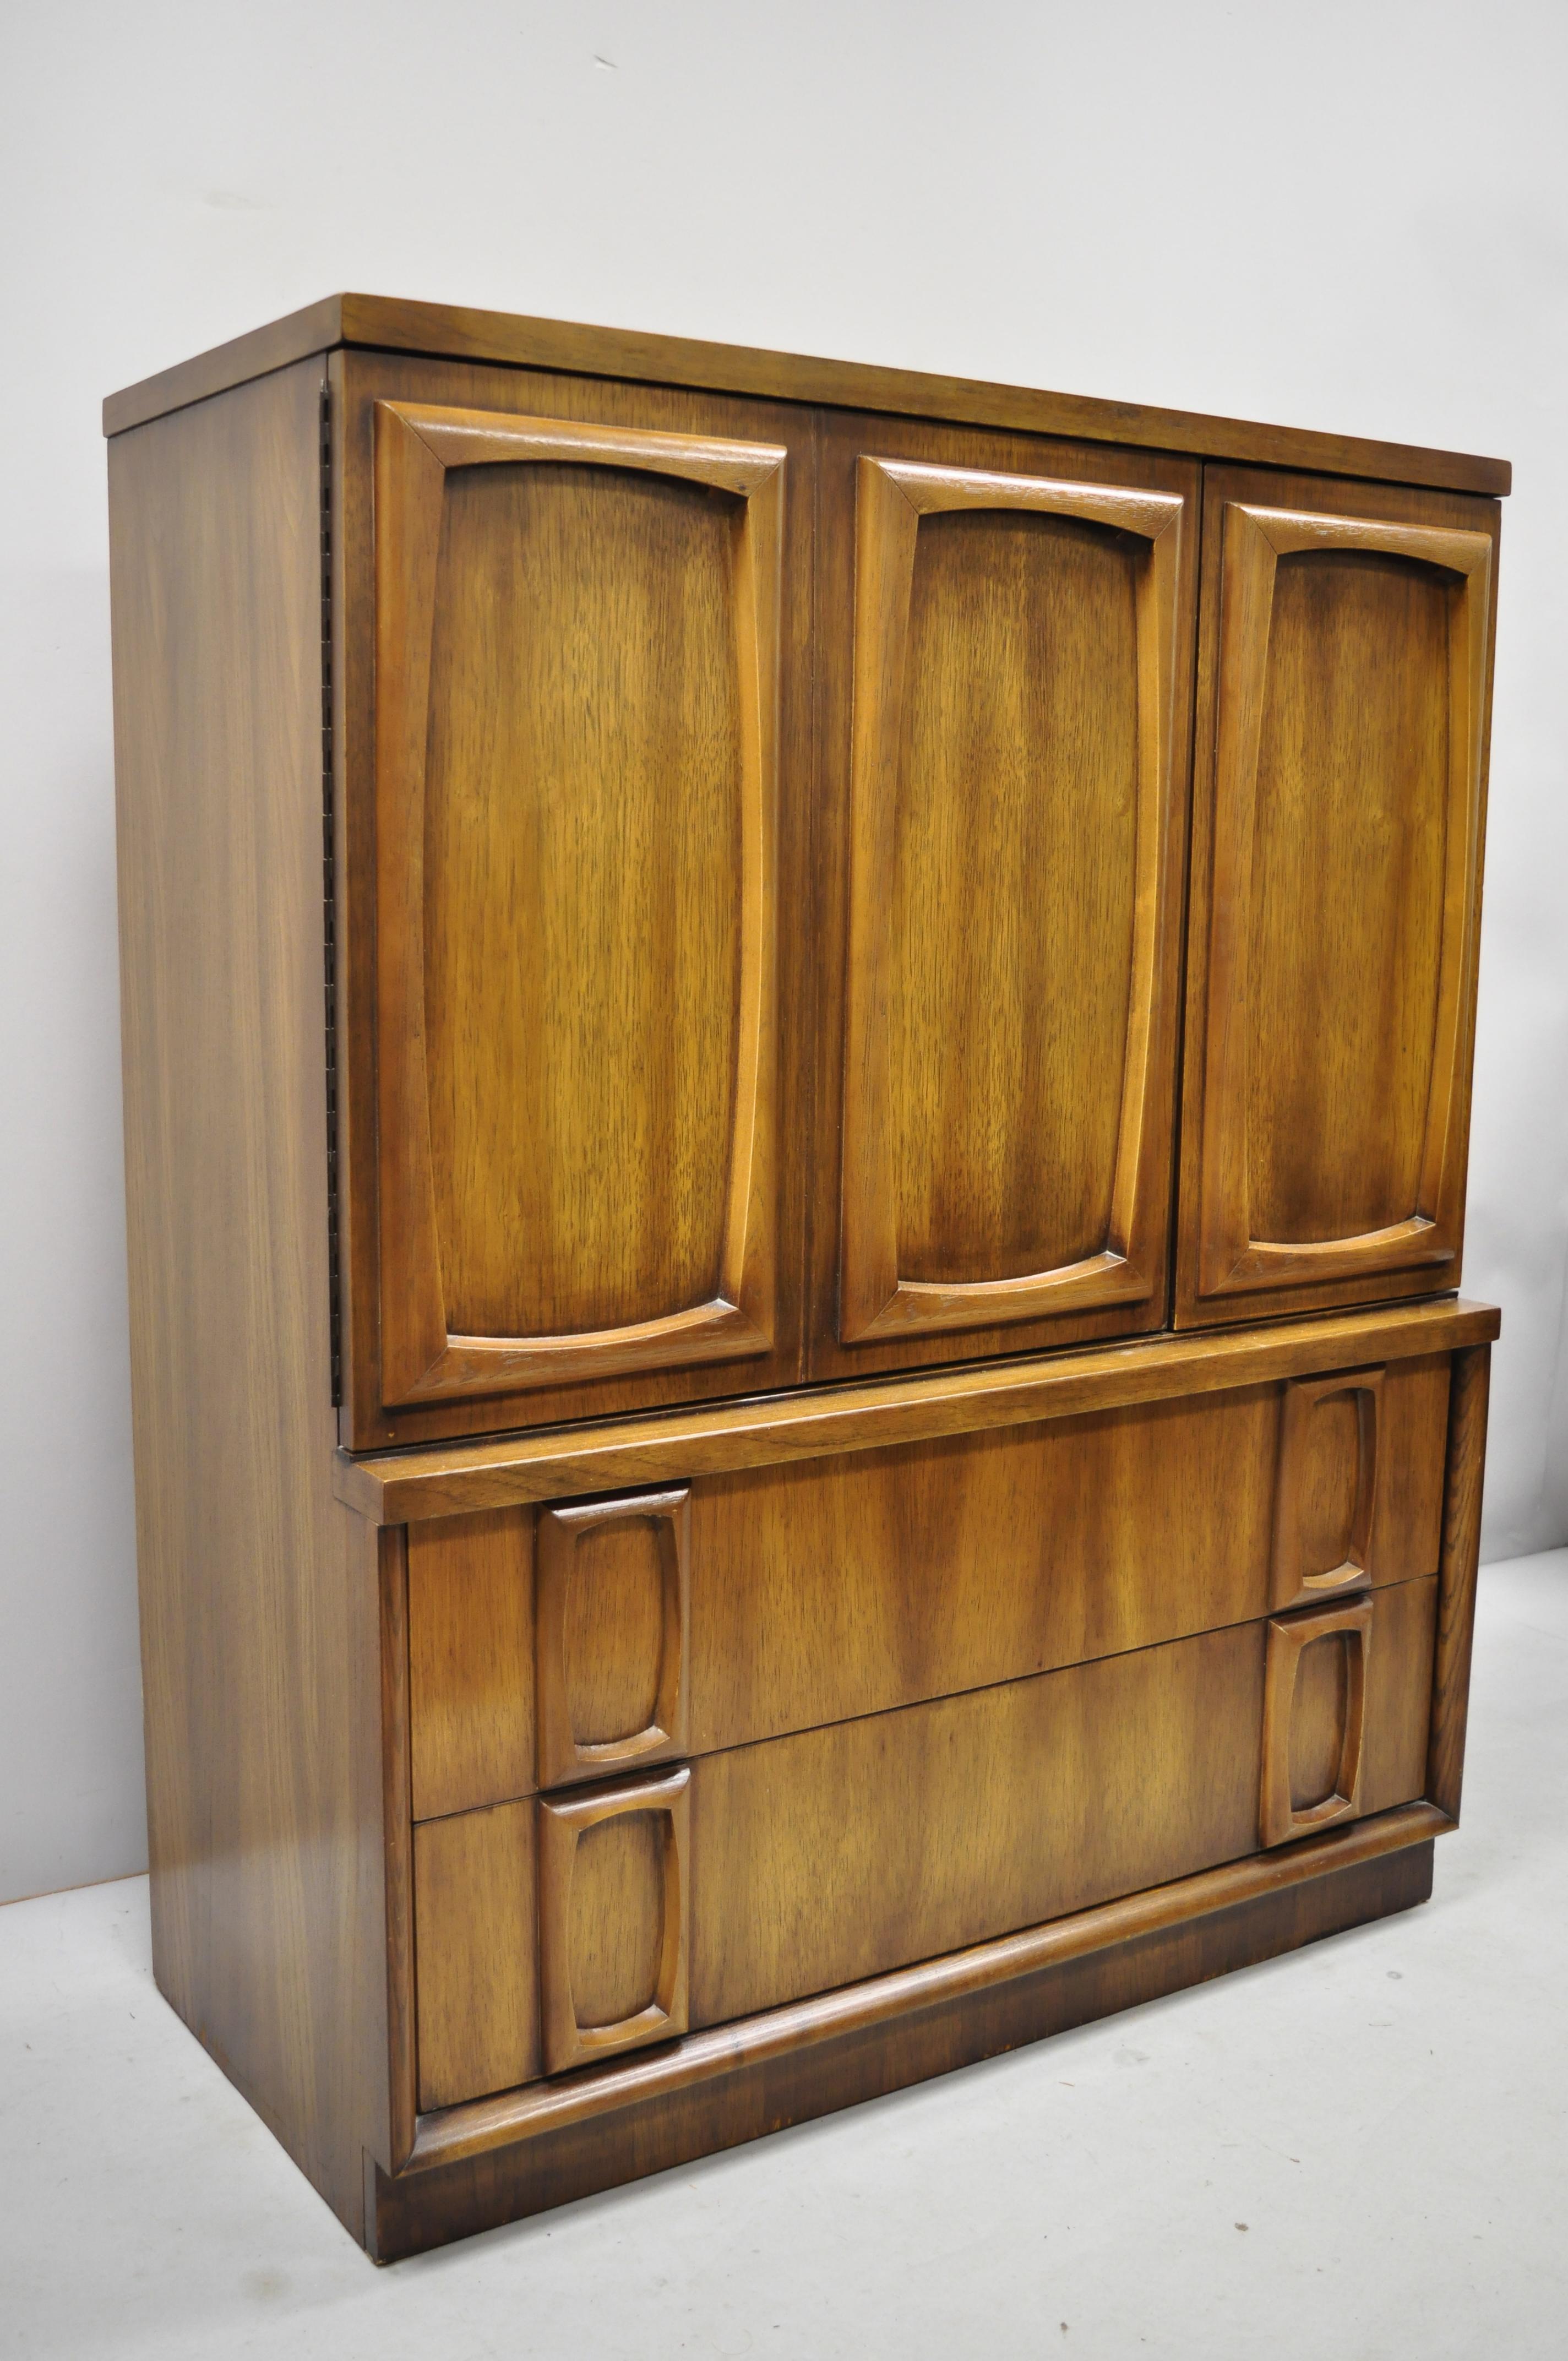 Vintage Mid-Century Modern sculpted walnut tall chest dresser armoire cabinet.
Item includes sculpted wood pulls, beautiful wood grain, 2 swing doors, 5 dovetailed drawers, clean modernist lines, great style and form, circa mid-20th century.